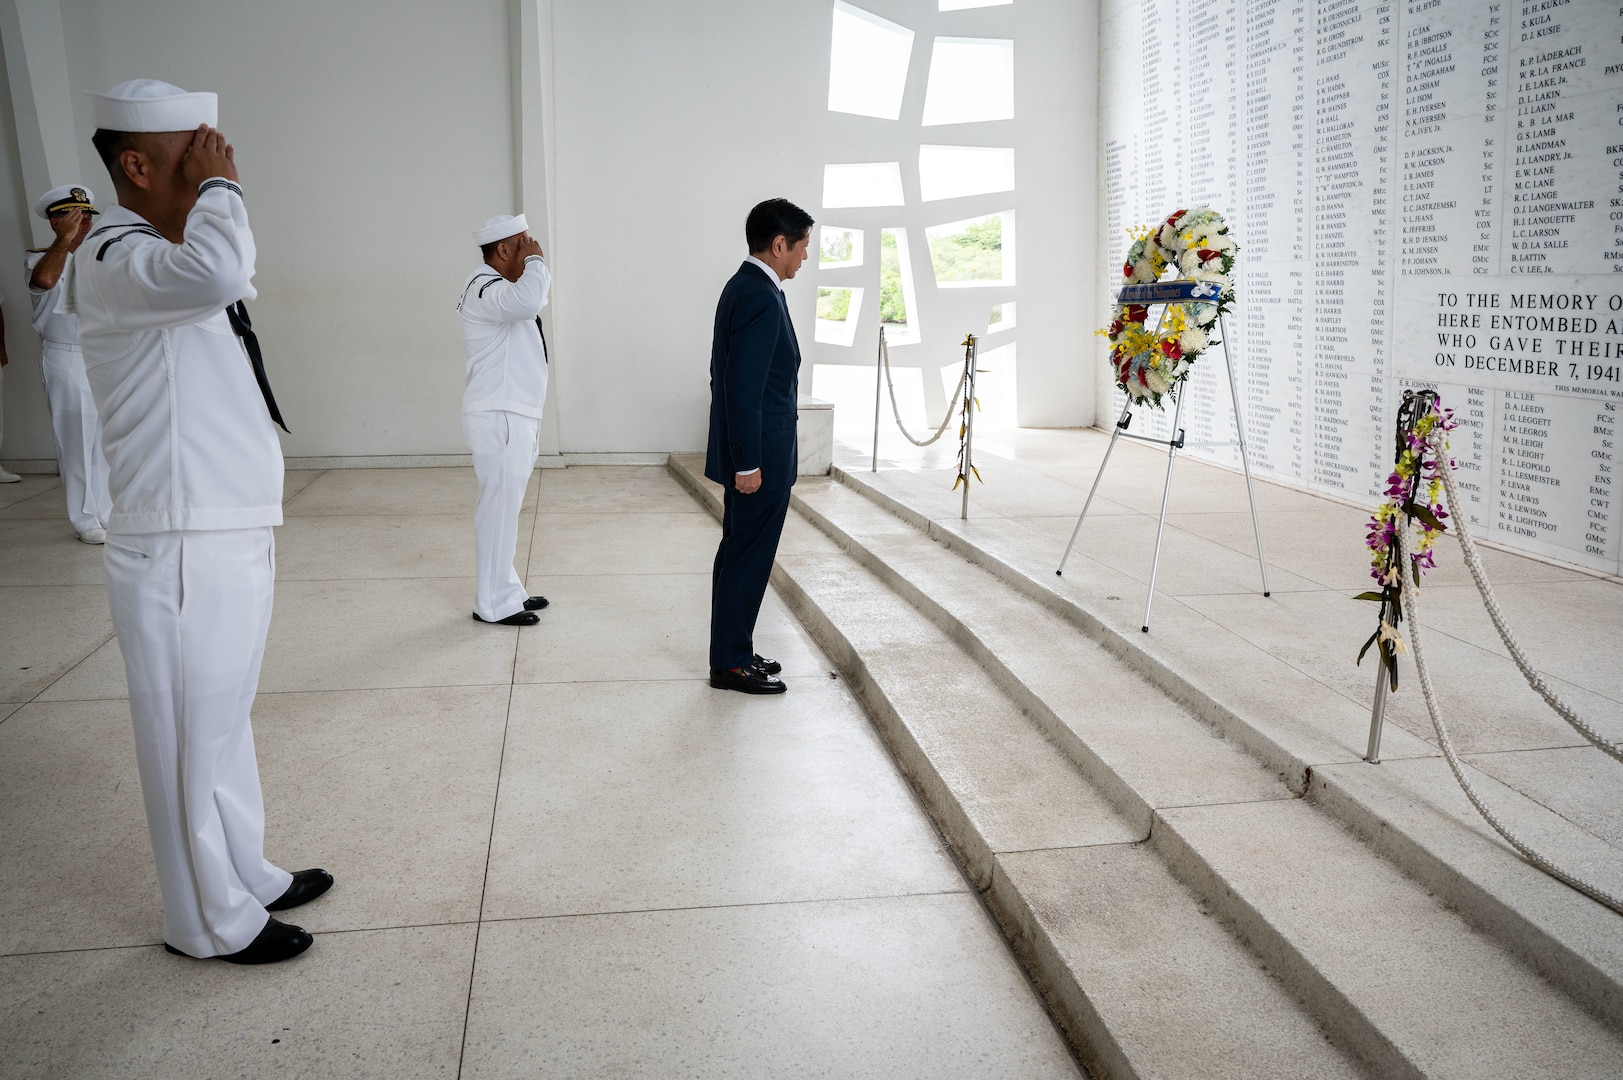 Philippine President Ferdinand R. Marcos Jr. pays his respects during a wreath-laying ceremony at the USS Arizona Memorial in Pearl Harbor, Hawaii, Nov. 19, 2023. The visit to U.S. Indo-Pacific command headquarters in Honolulu included exchanges on regional security and mutual partnership, further developing the strong democratic, economic and strategic partnership with the Philippines codified in the 1951 U.S.-Philippines Mutual Defense Treaty. USINDOPACOM is committed to enhancing stability in the Indo-Pacific region by promoting security cooperation, encouraging peaceful development, responding to contingencies, deterring aggression and, when necessary, fighting to win. (U.S. Navy photo by Chief Mass Communication Shannon Smith)